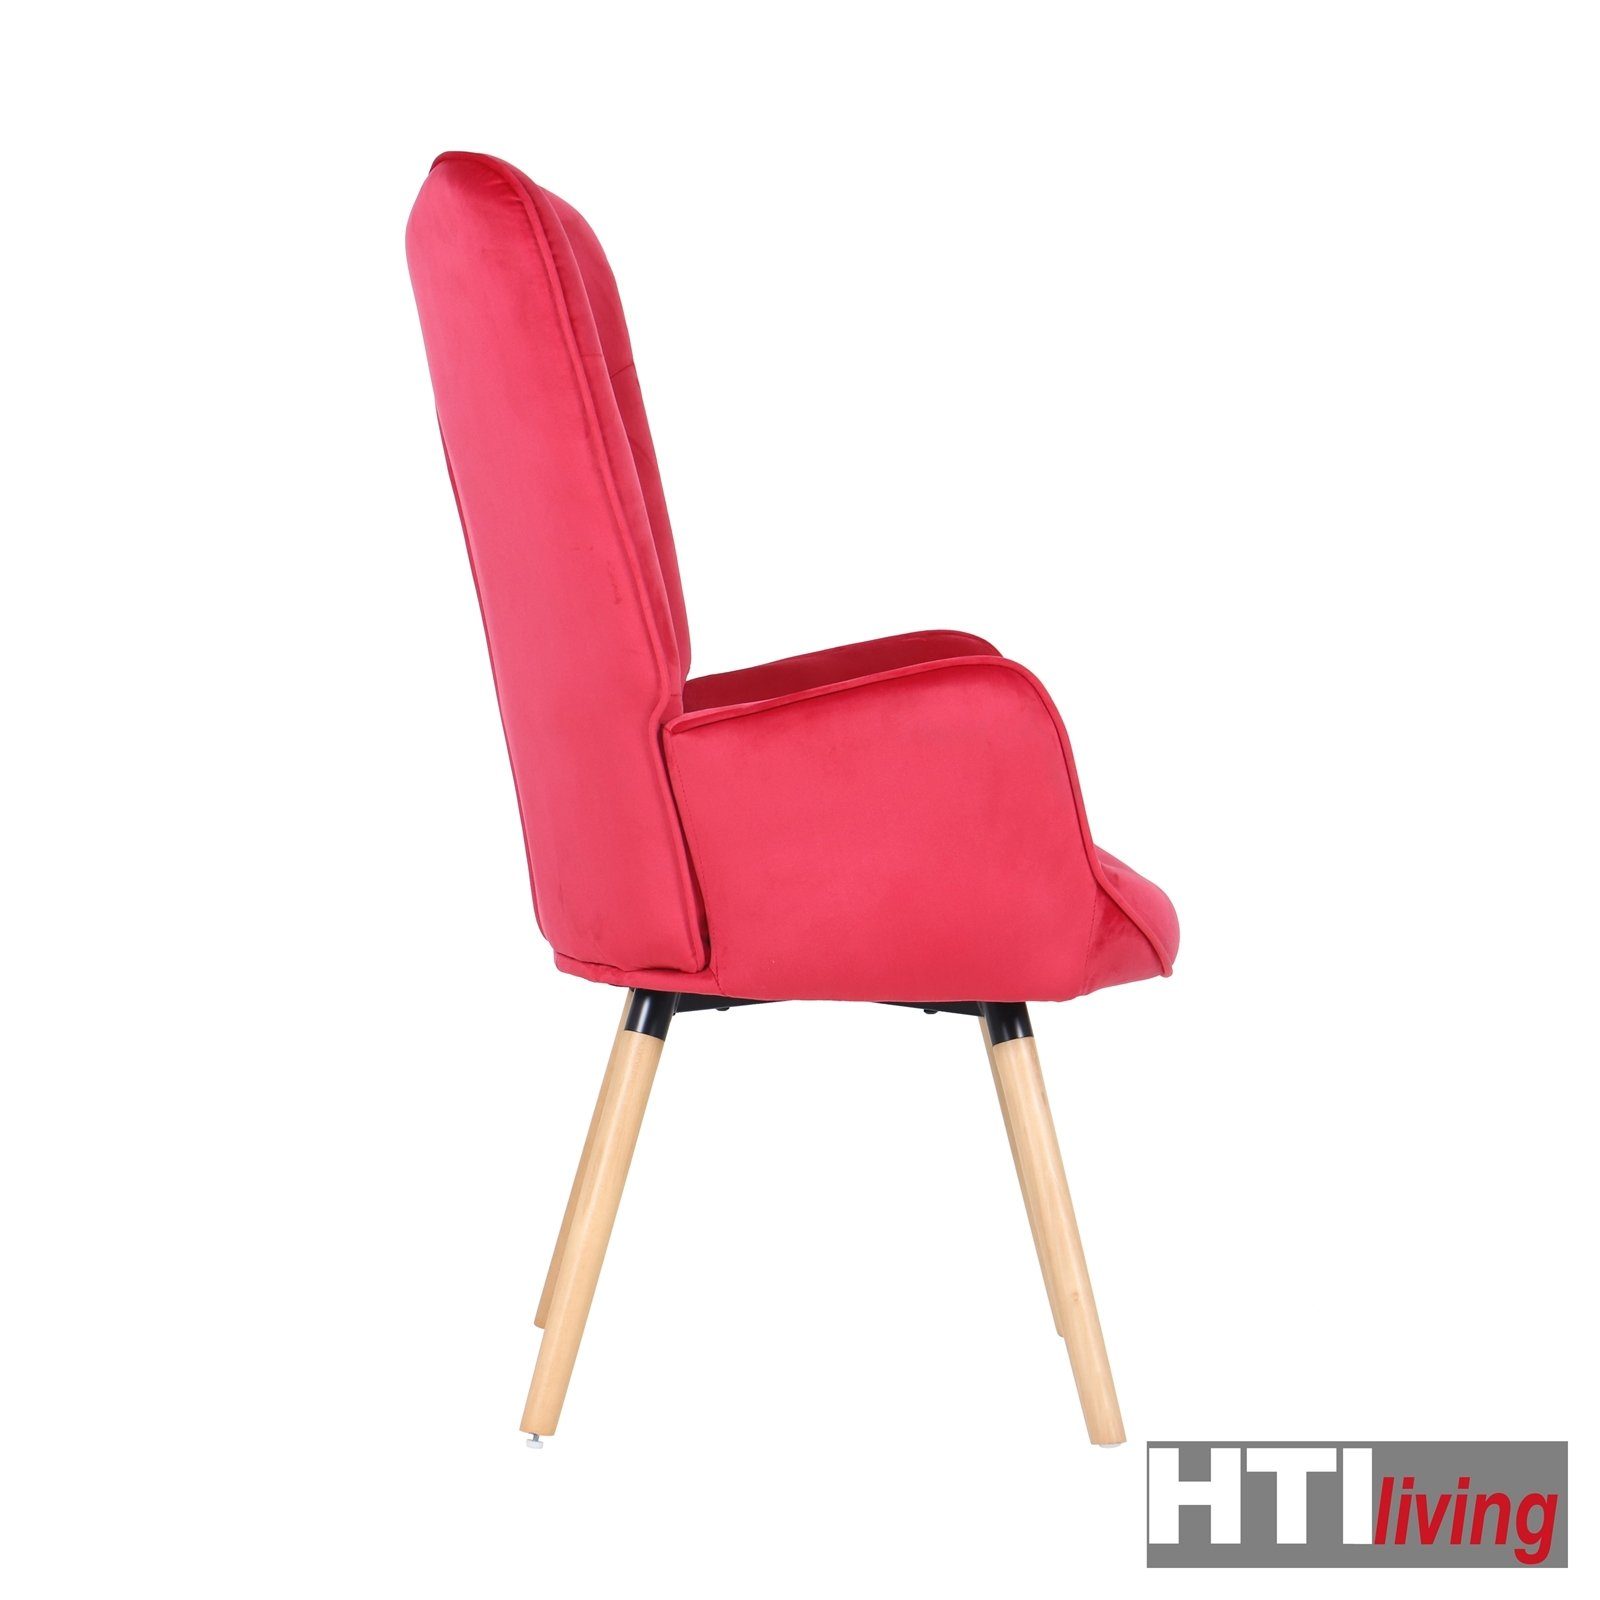 | Loungesessel Loungesessel Rot Cassidy HTI-Living Rot